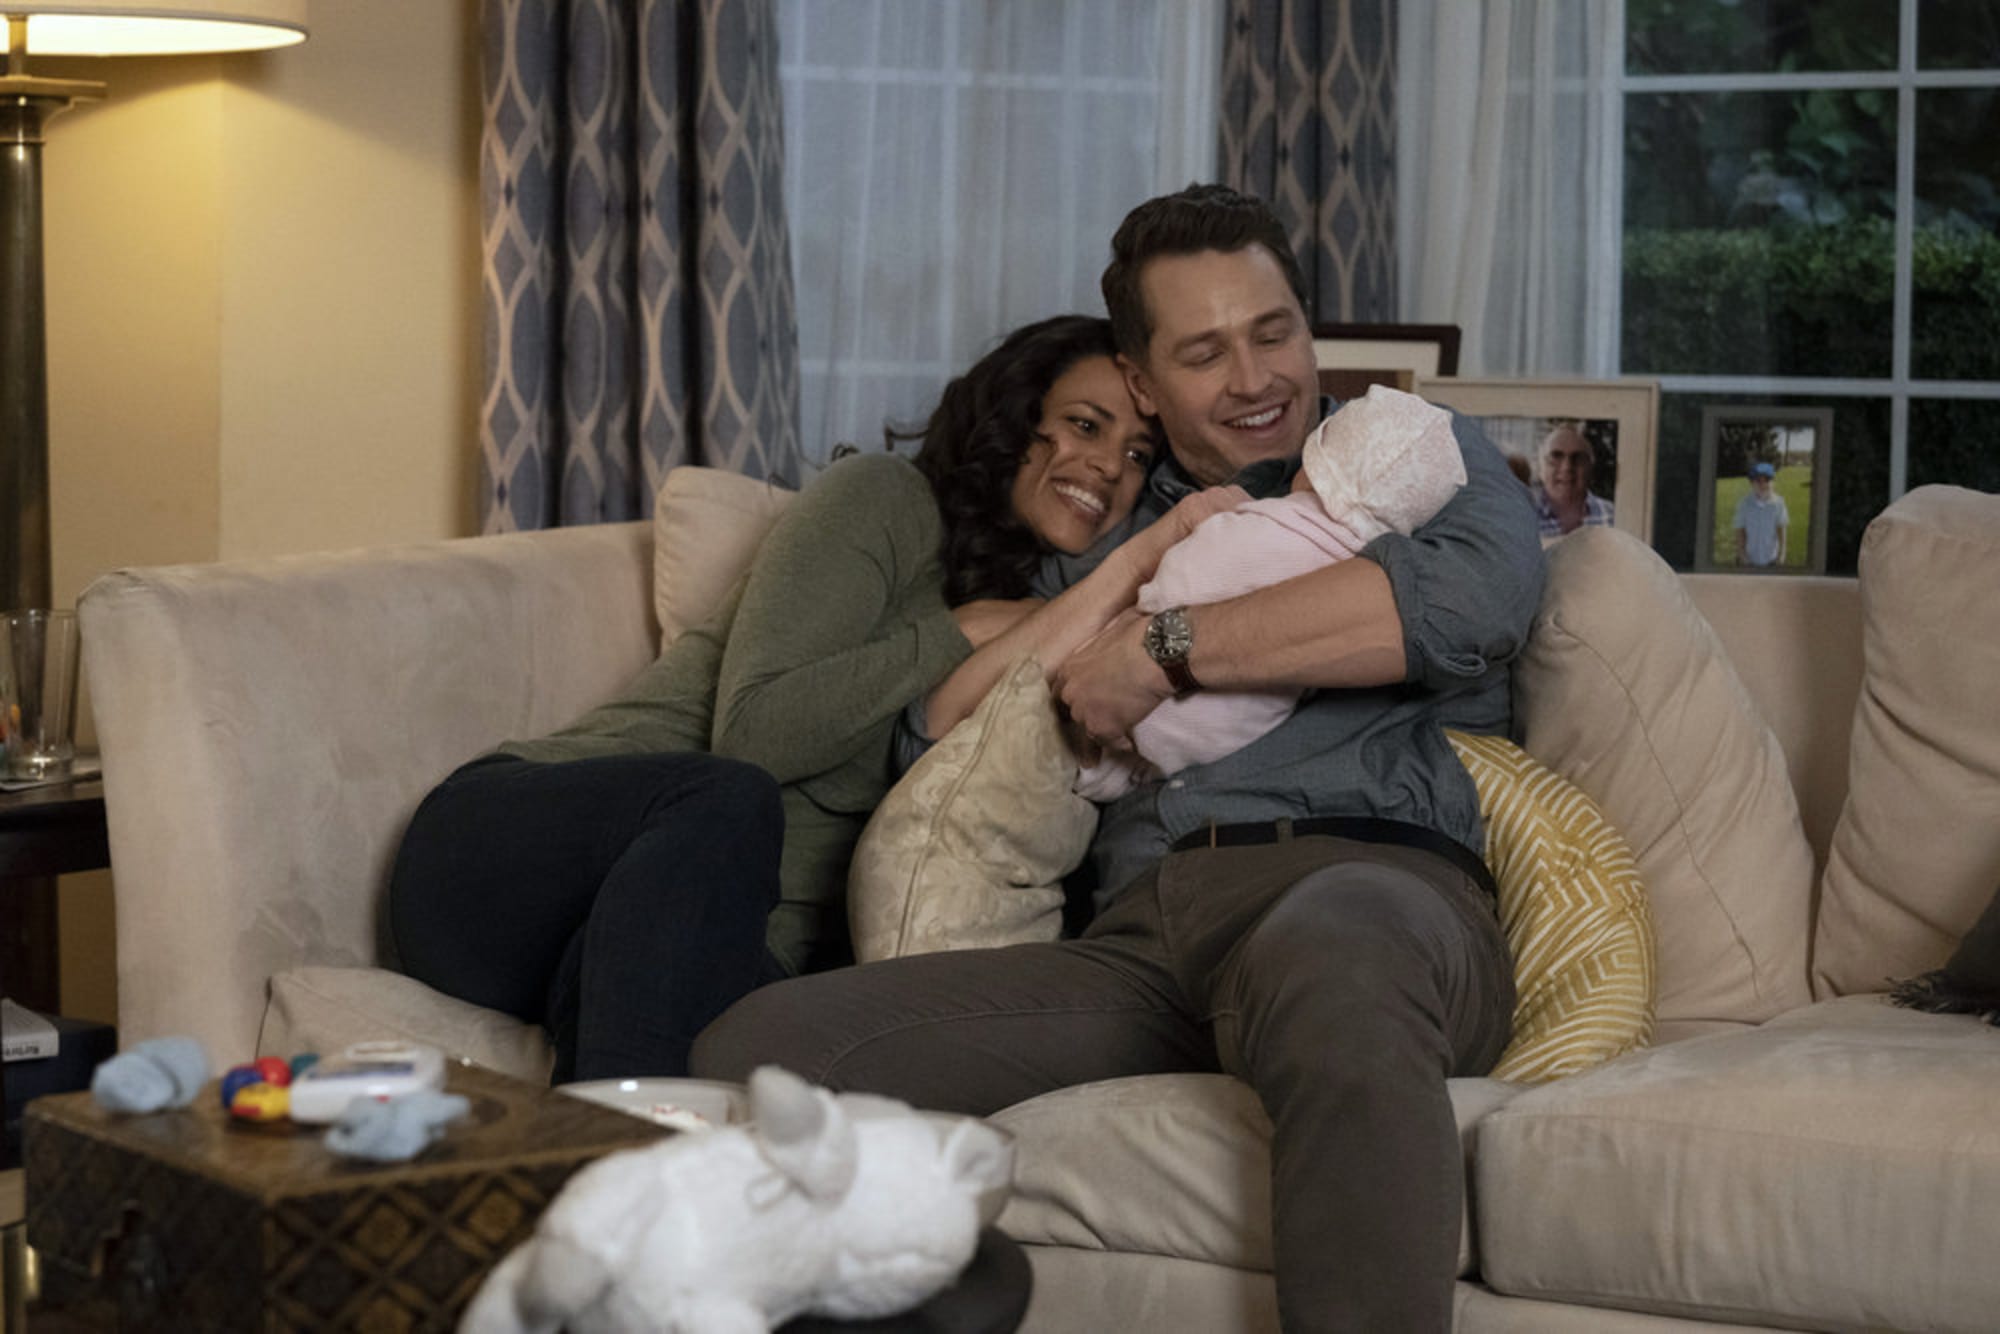 new-manifest-season-4-photo-hints-at-major-time-jump-for-baby-eden